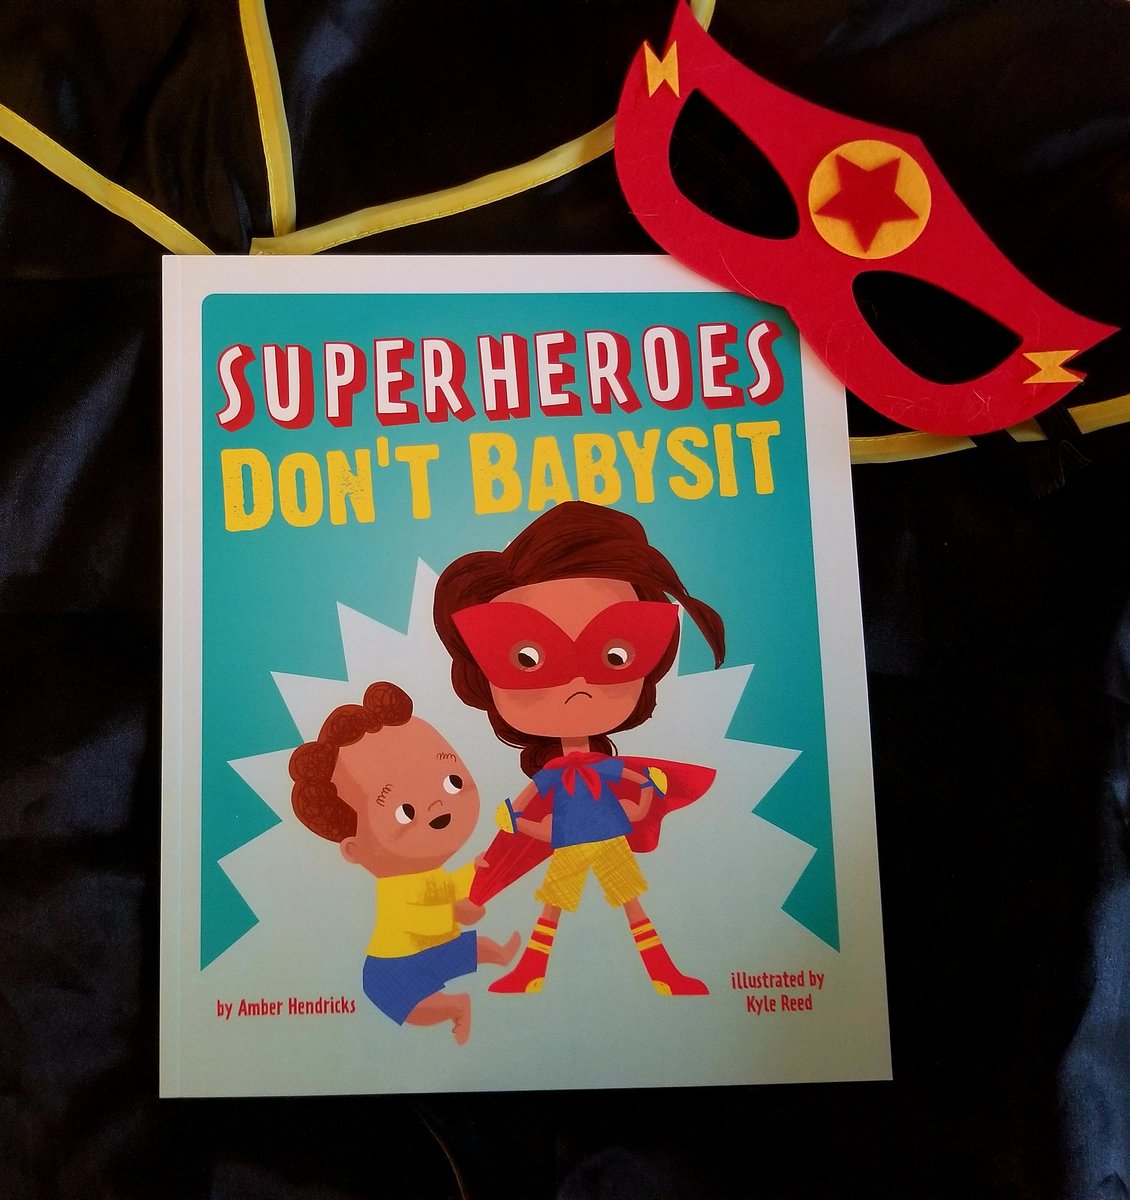 Calling all super #TEACHers, #Librarians, & #Parents! I'm giving away 1 of my author copies of SUPERHEROES DON'T BABYSIT in paperback! Just follow, like/RT for a chance to win! US only. Giveaway ends 7/28/23. #Giveaway #Kidlit #KidlitArt #picturebooks #Library #backtoschool